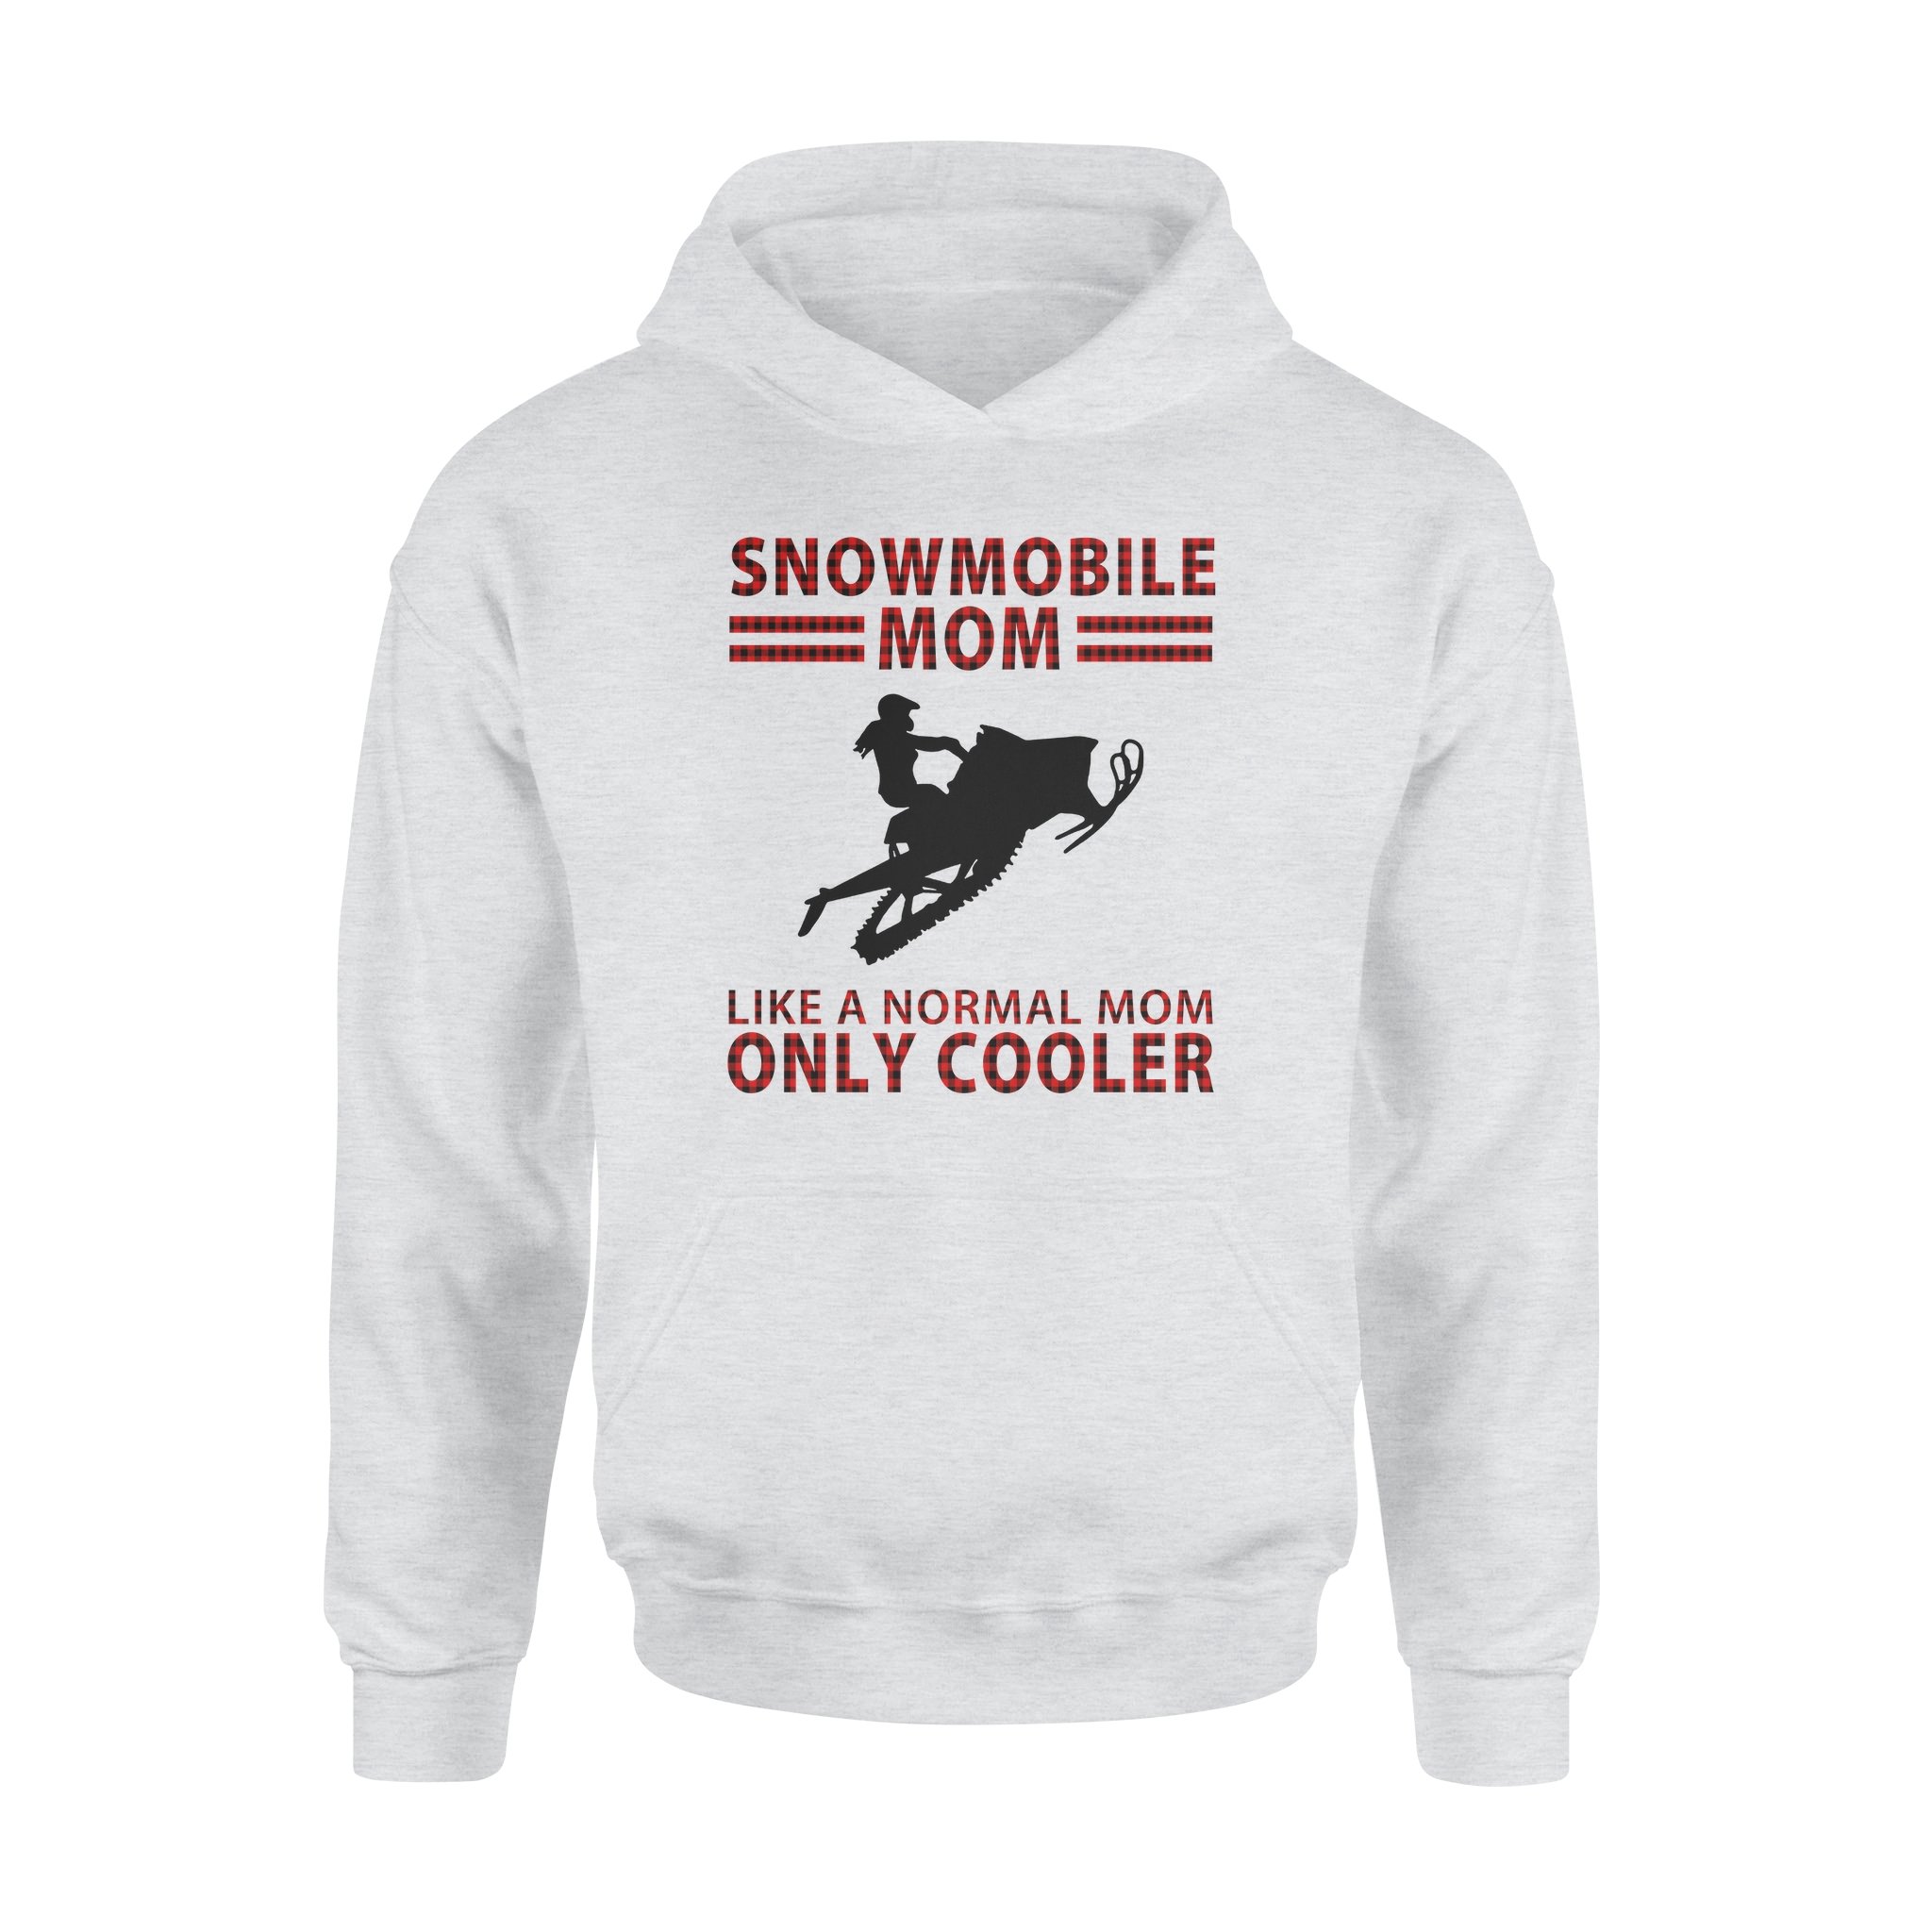 Snowmobile Mom Like A Normal Mom Only Cooler – Standard Hoodie